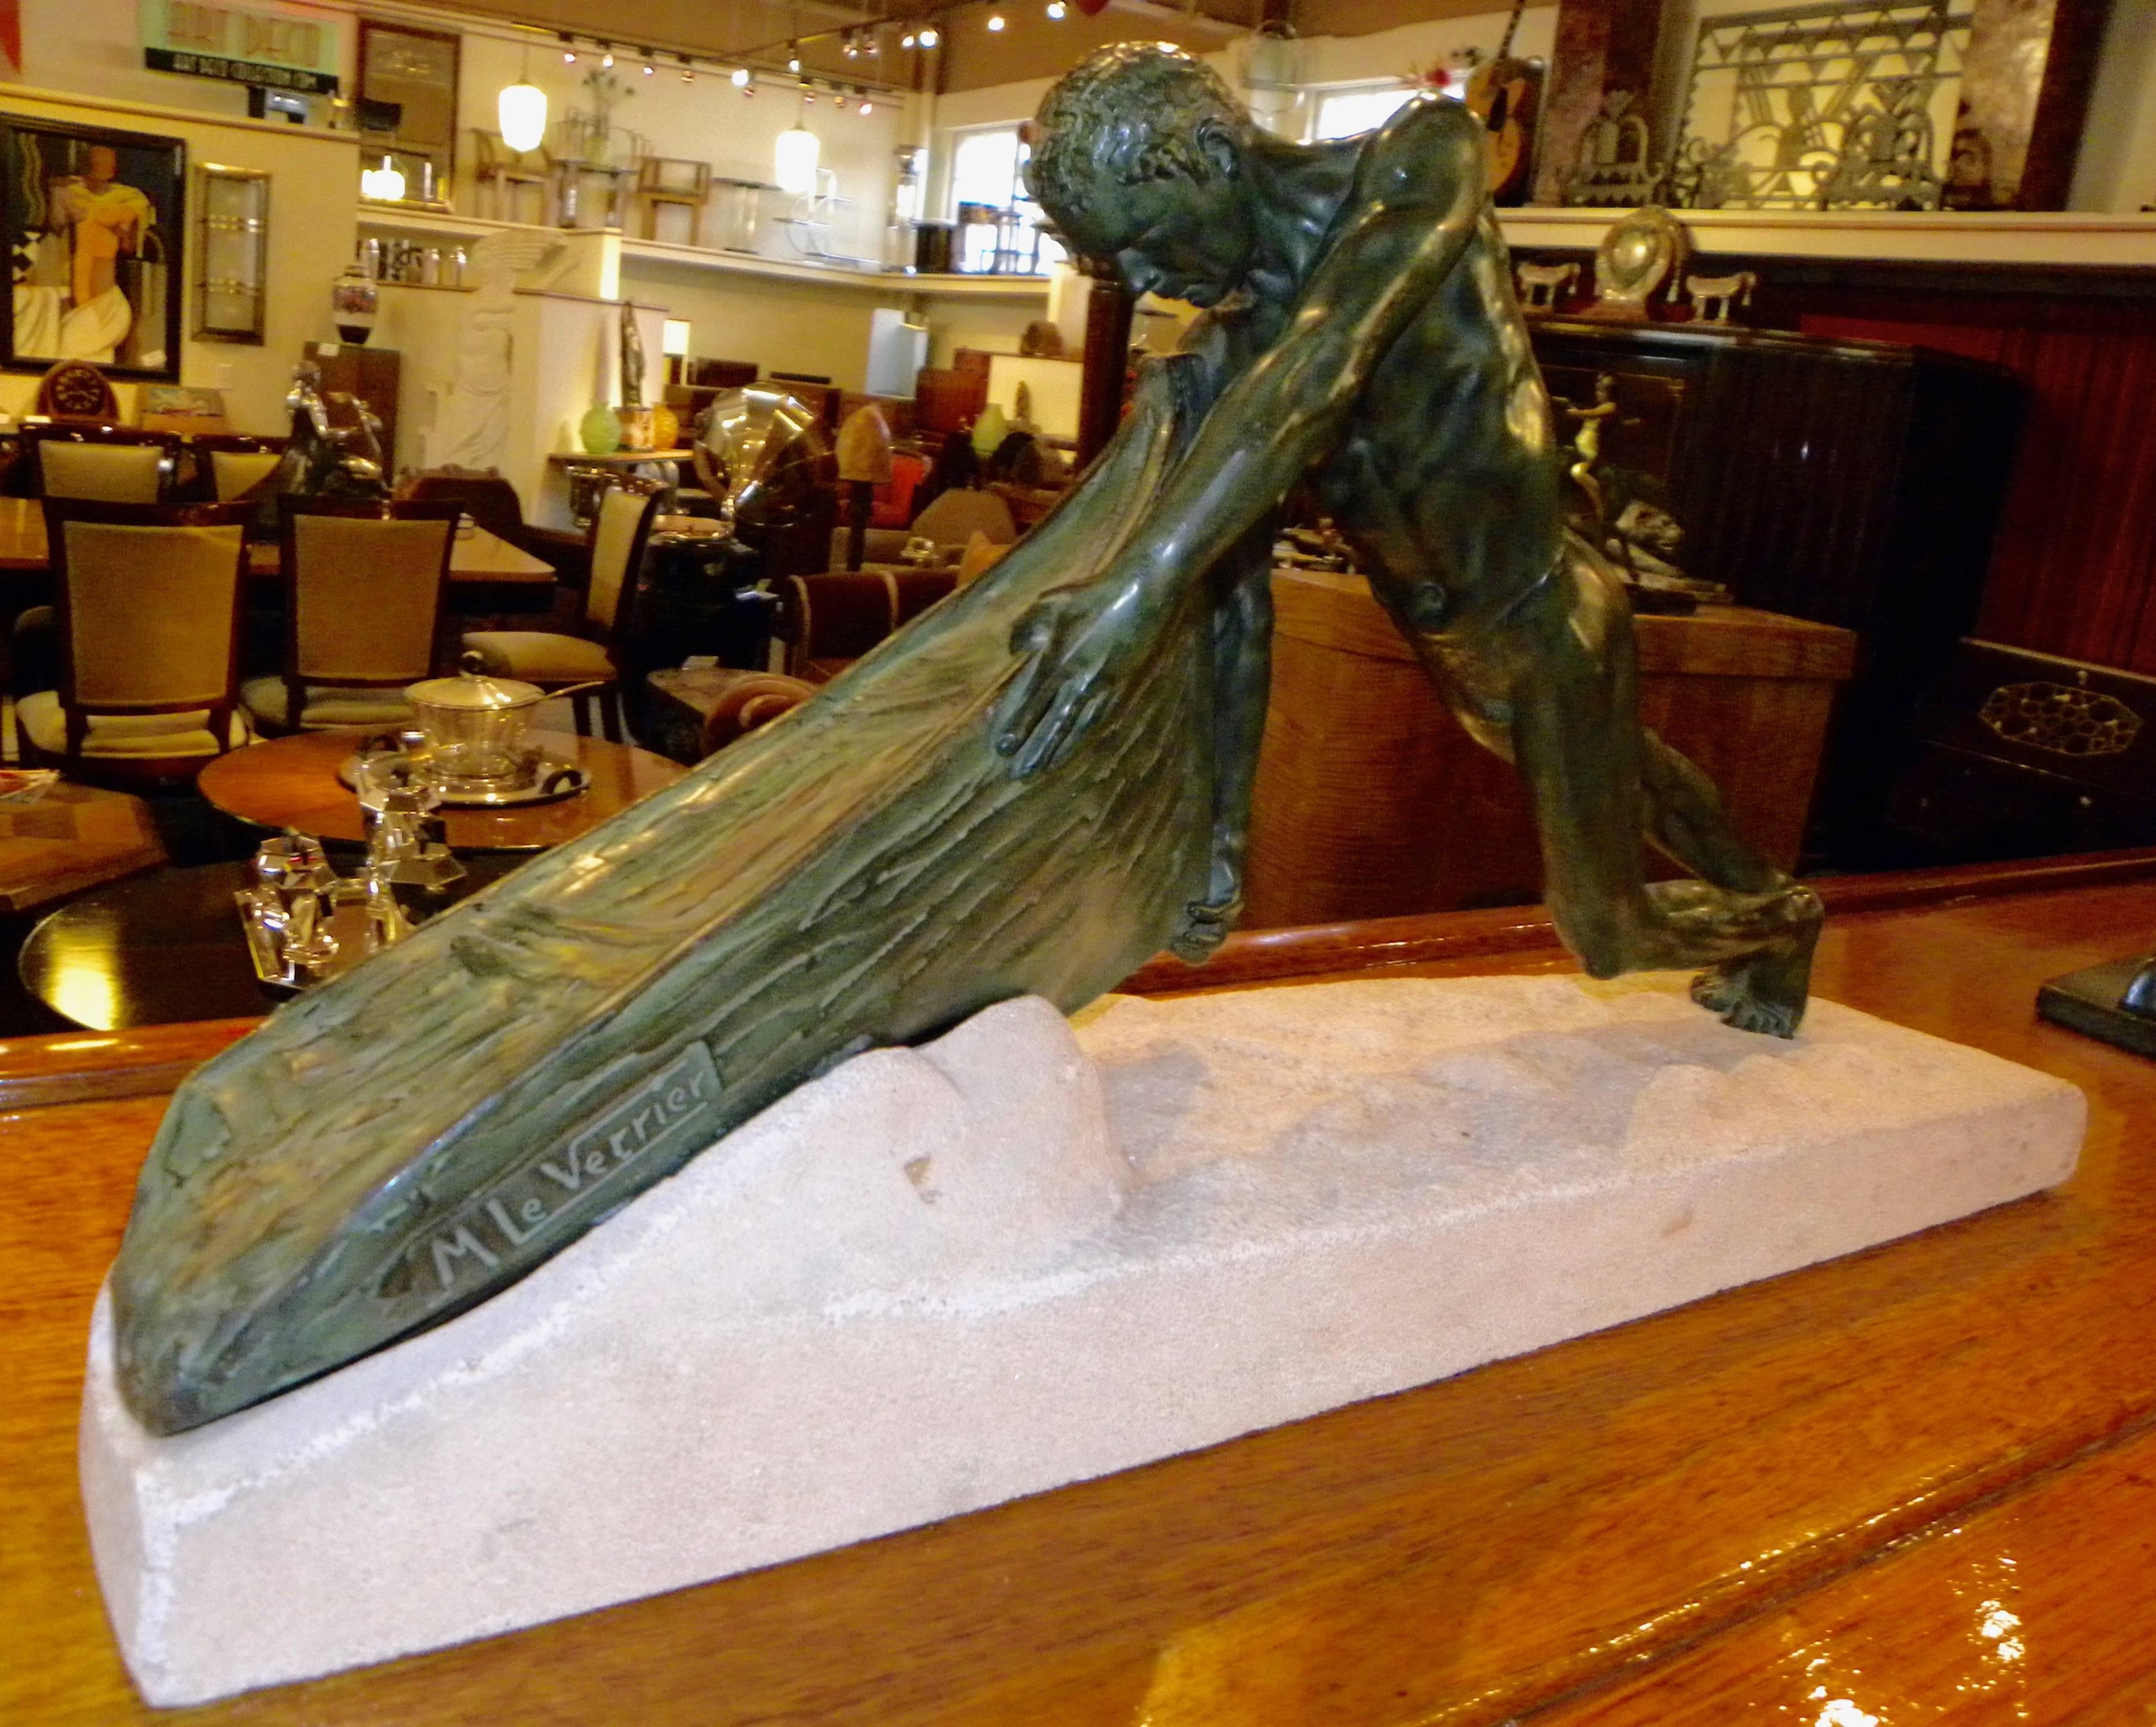 An Art Deco Sculpture showing great strength in a depiction of a man pulling his row boat from the sand. This striking work done and signed by Max Le Verrier in the late 1920s France is especially dynamic.

Notice the musculature of the man, the